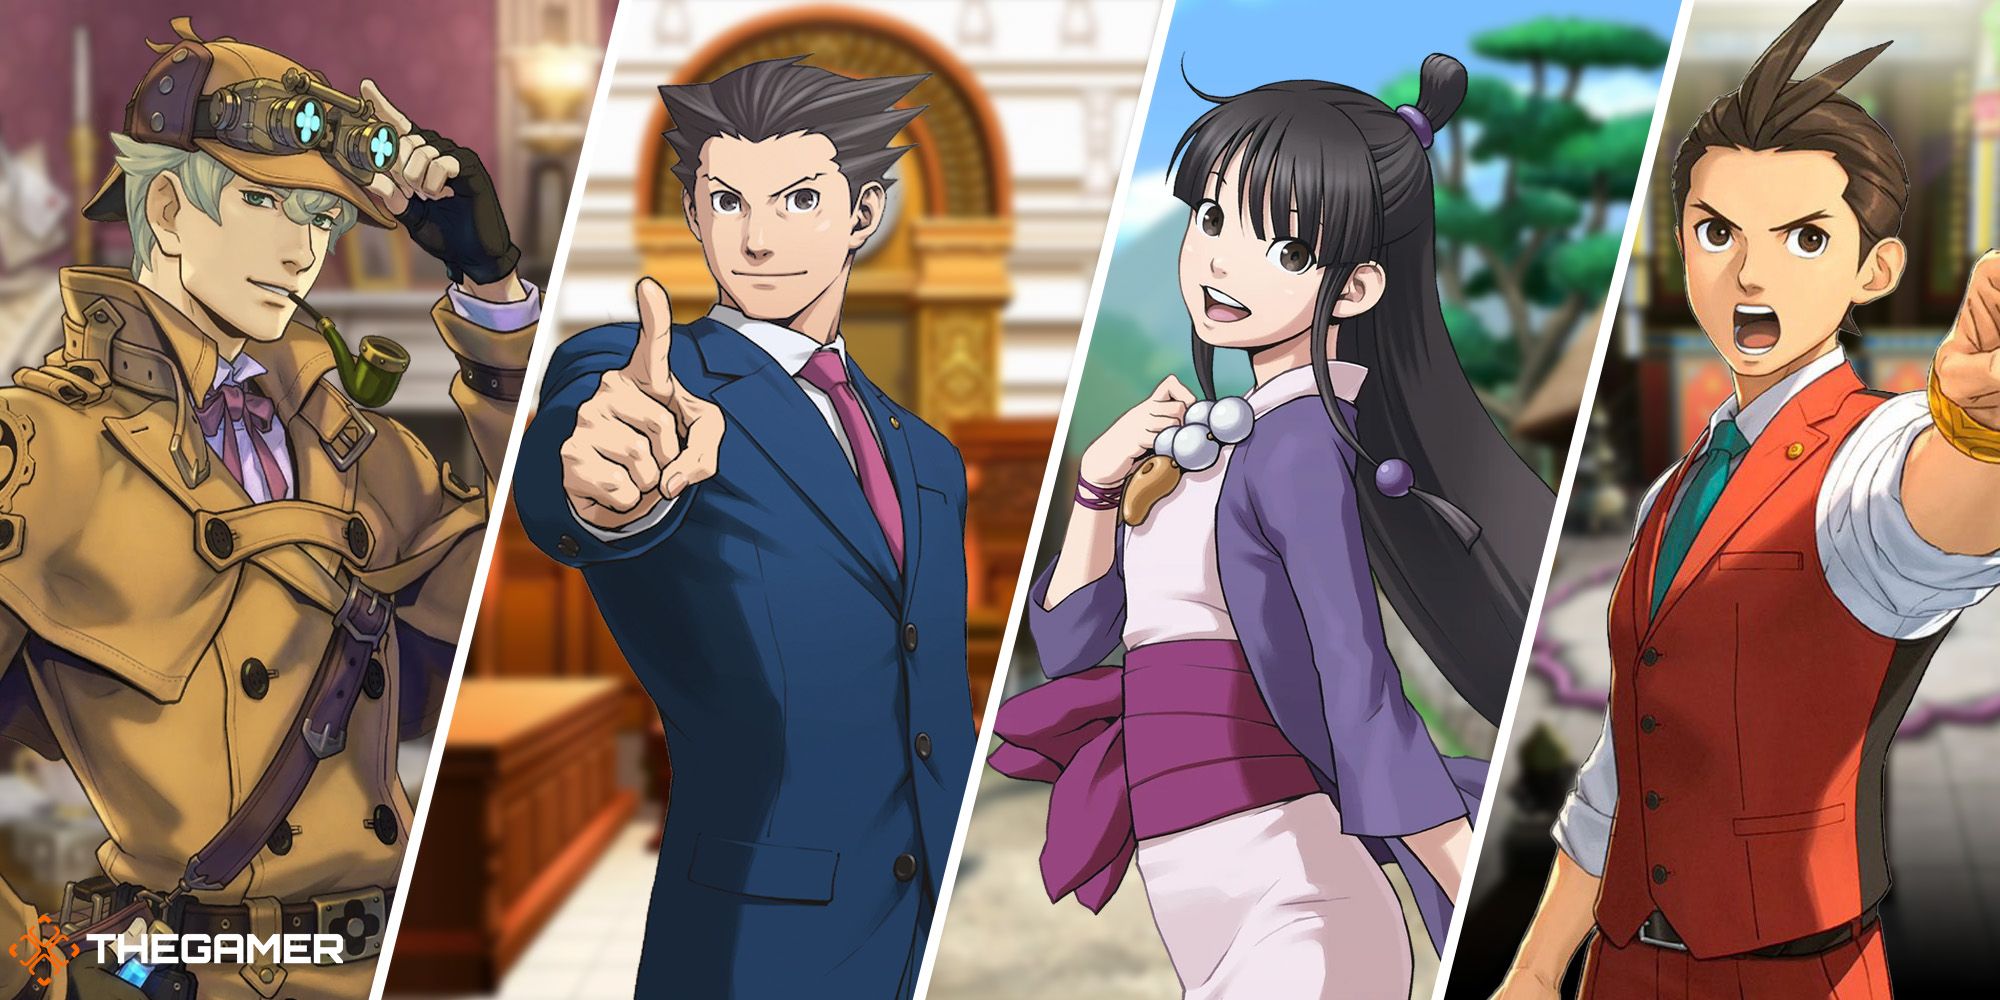 Phoenix Wright, Apollo Justice, Maya Fey, and Herlock Sholmes from Ace Attorney